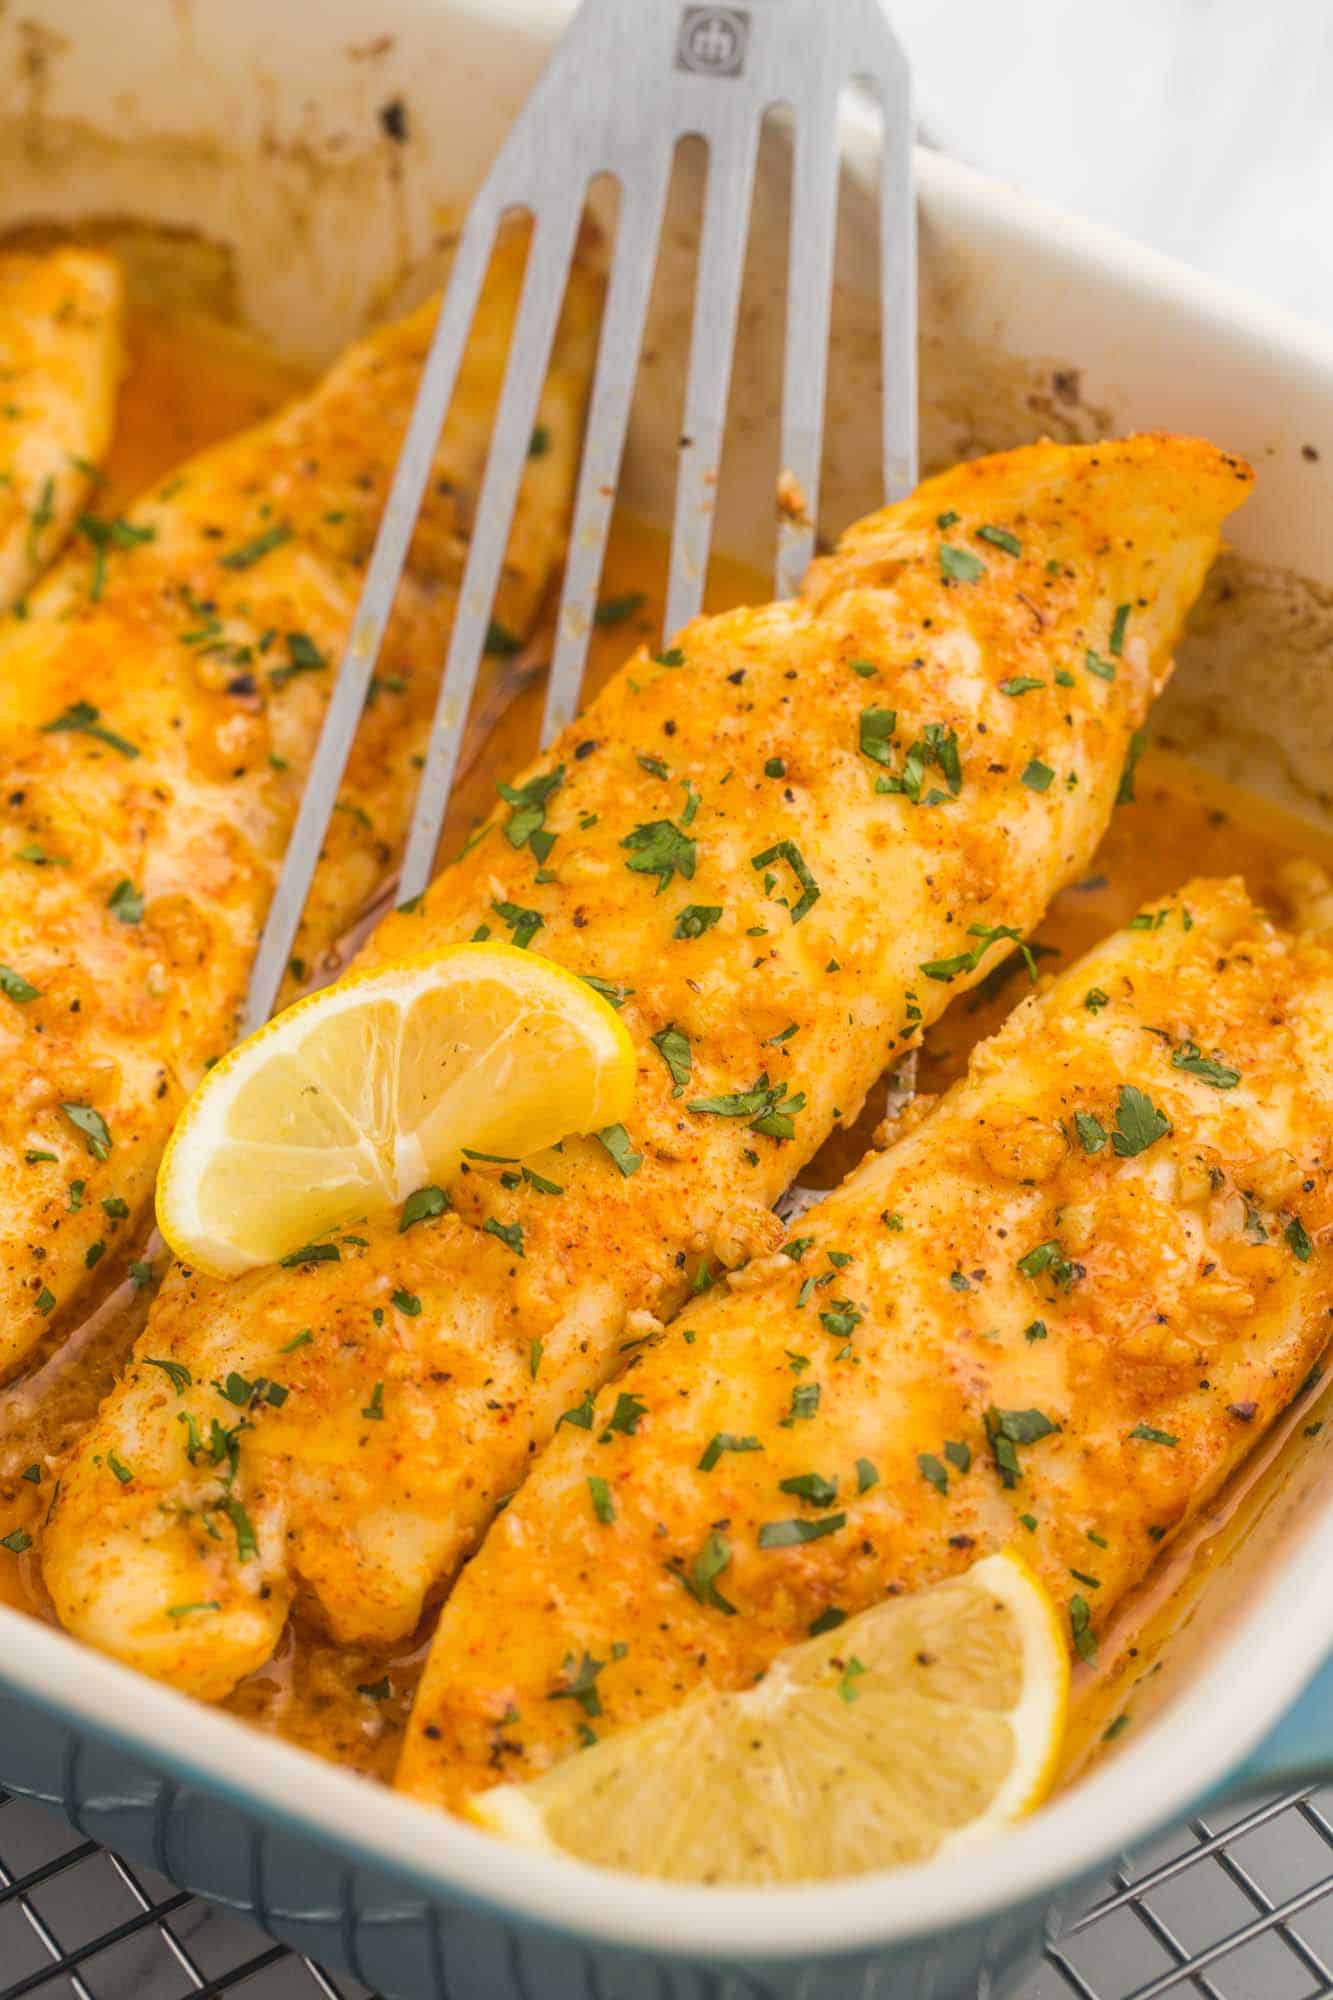 a casserole dish of baked tilapia fillets, garnished with lemon wedges. A fish flipper is lifting up a fillet. 